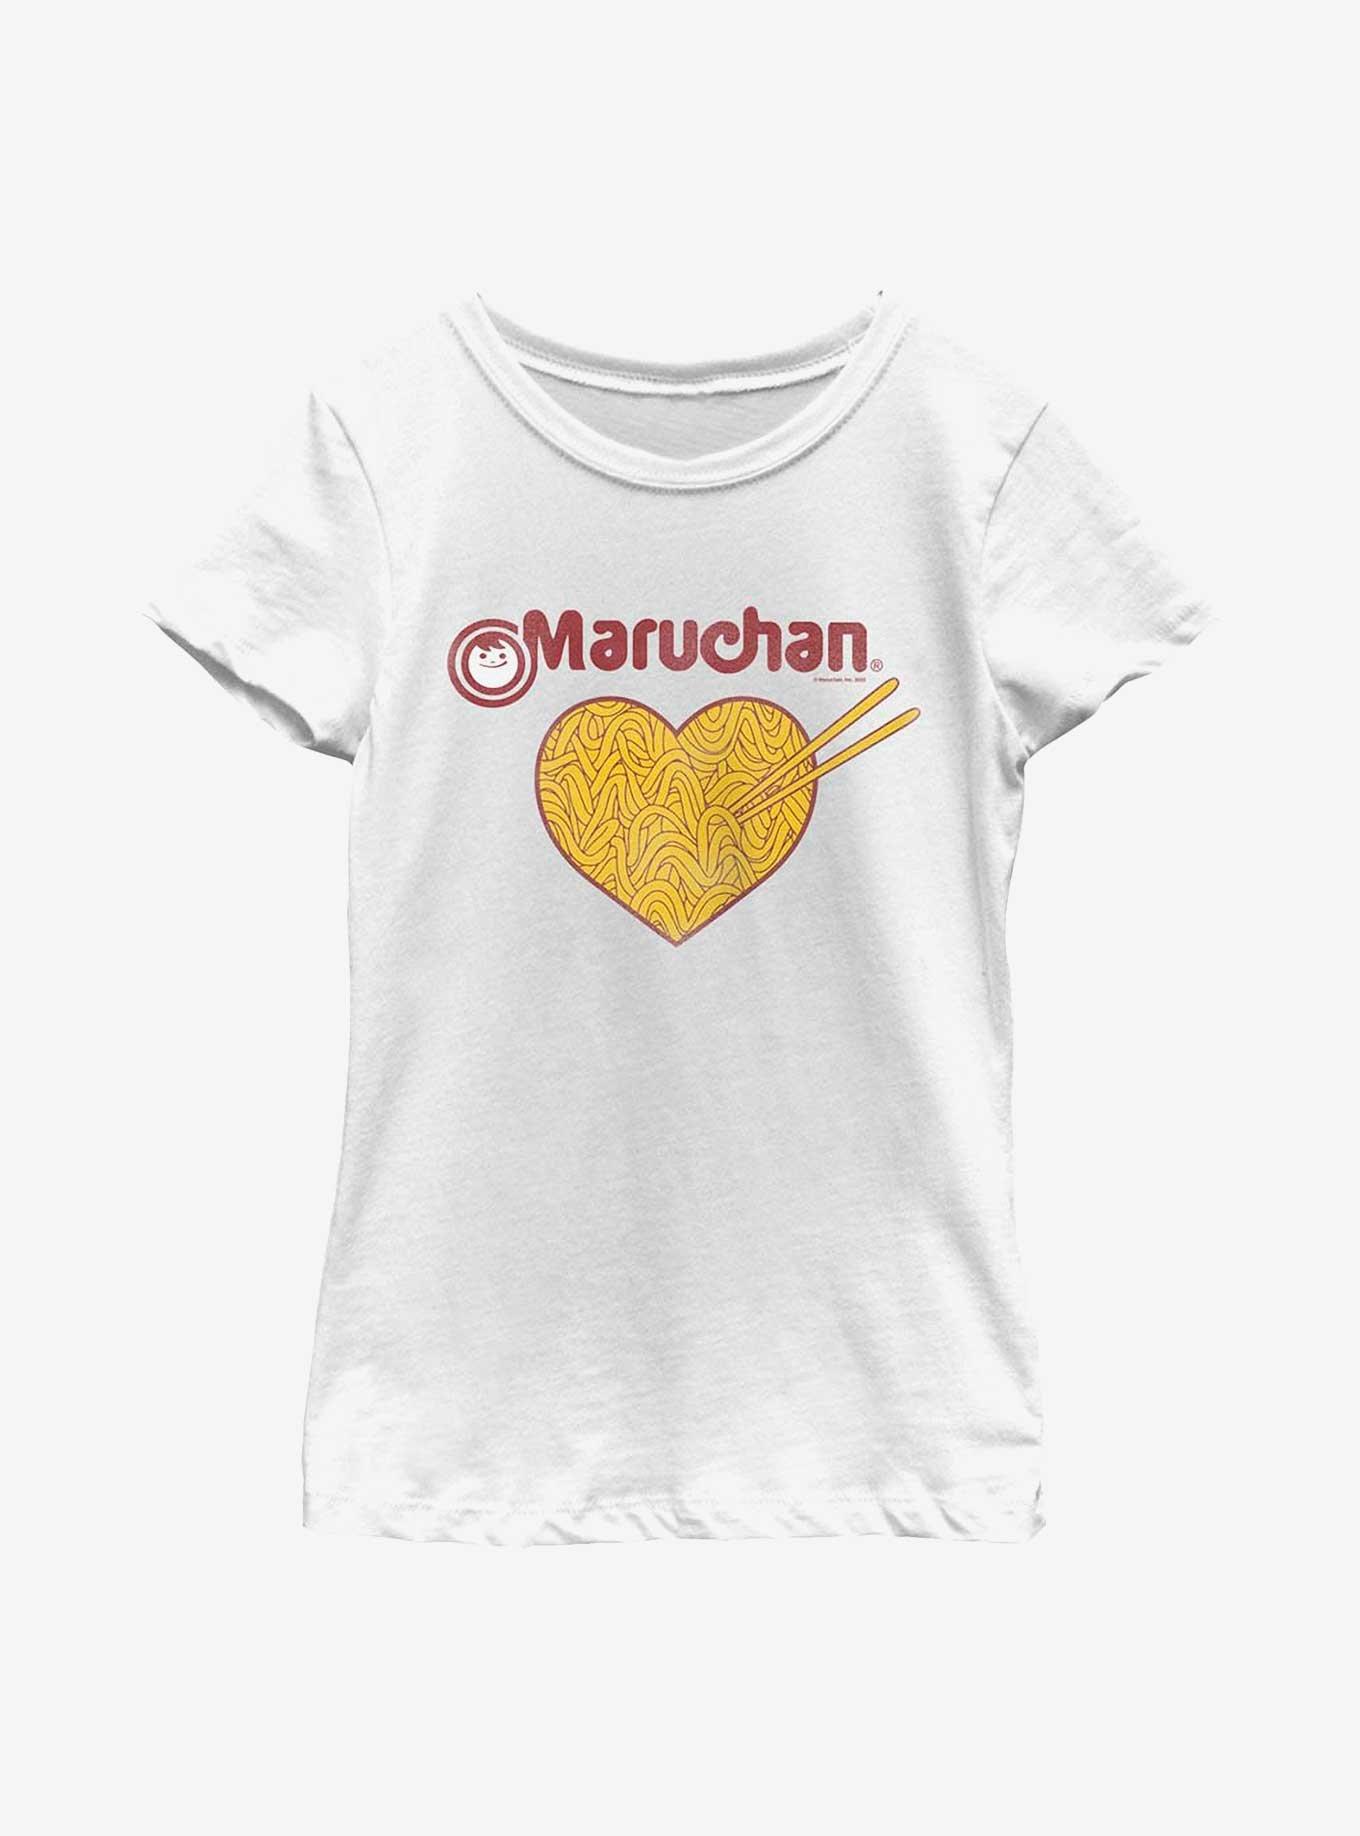 Maruchan Noodles Heart Youth Girls T-Shirt, WHITE, hi-res